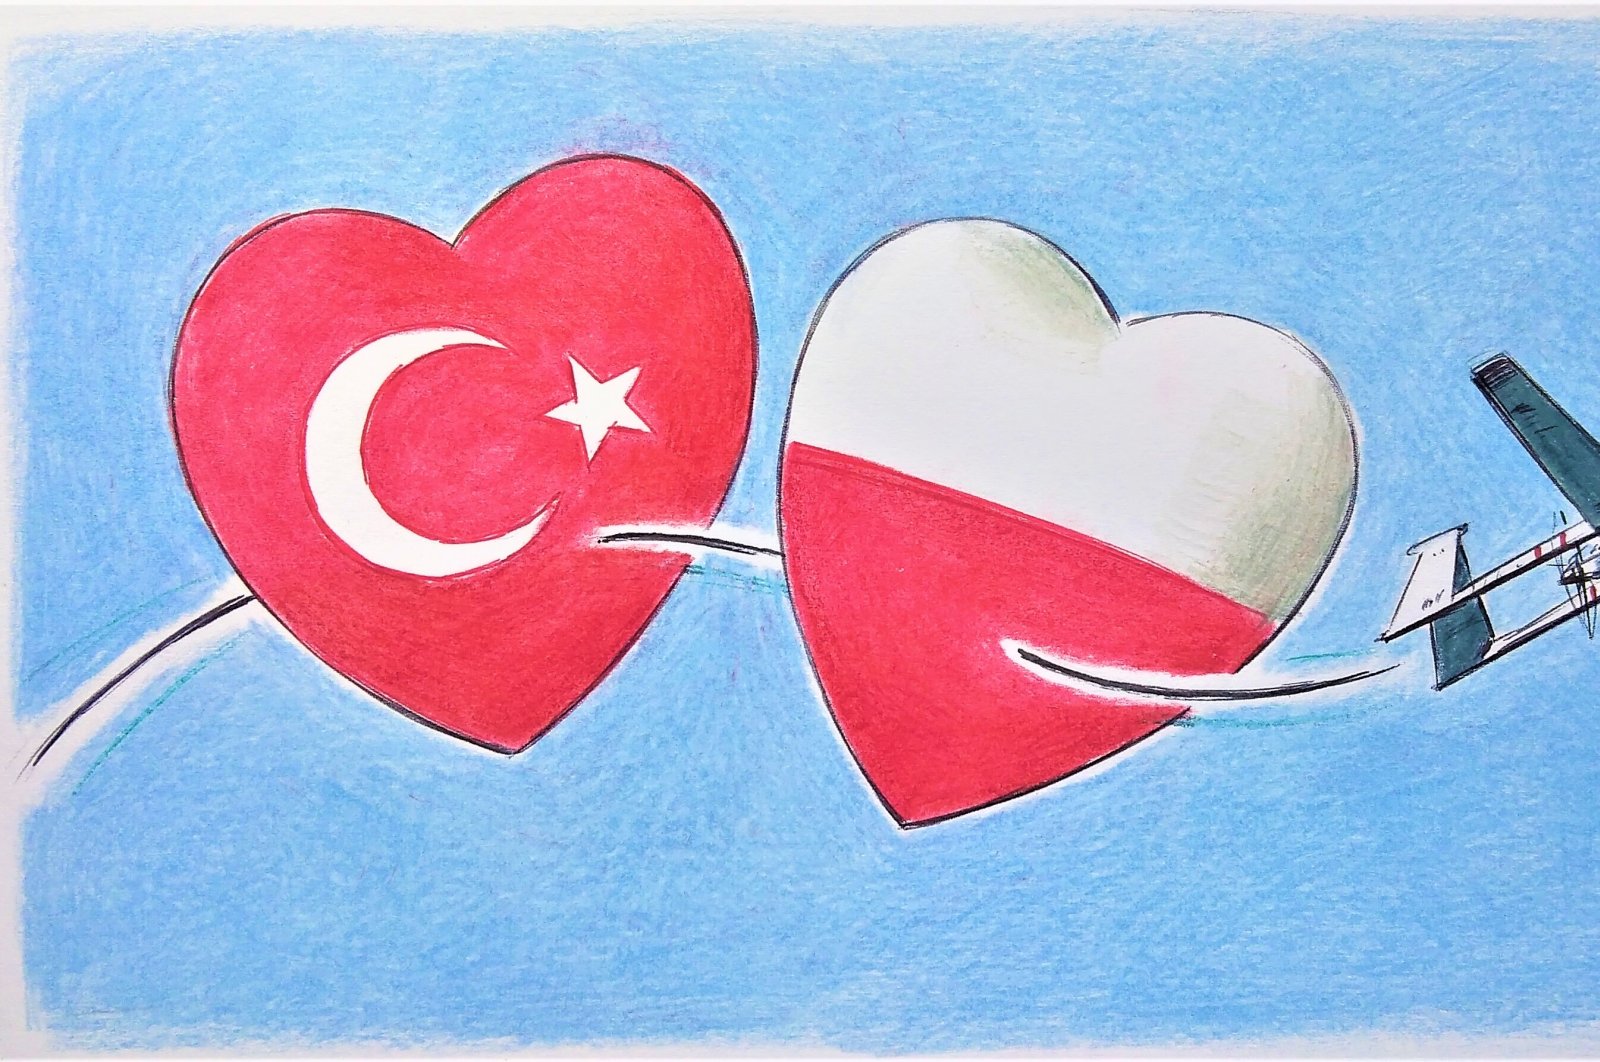 With Türkiye&#039;s dynamic economy and Poland&#039;s strong manufacturing base, both countries can benefit from increased trade and investment cooperation. (Illustration by Erhan Yalvaç)